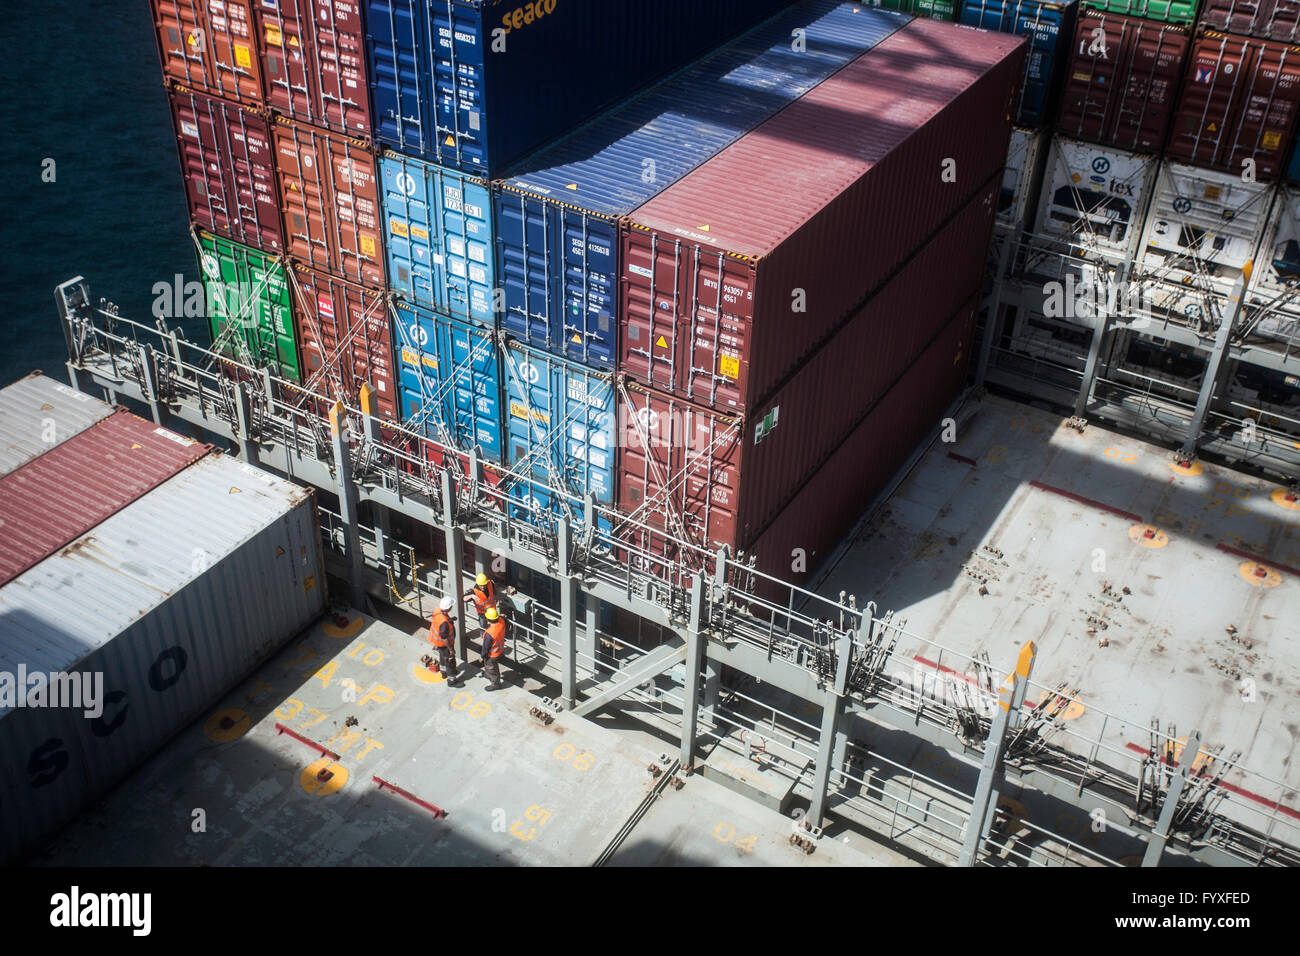 Workers on a container ship assisting with the process of stacking containers while docked at port. Stock Photo